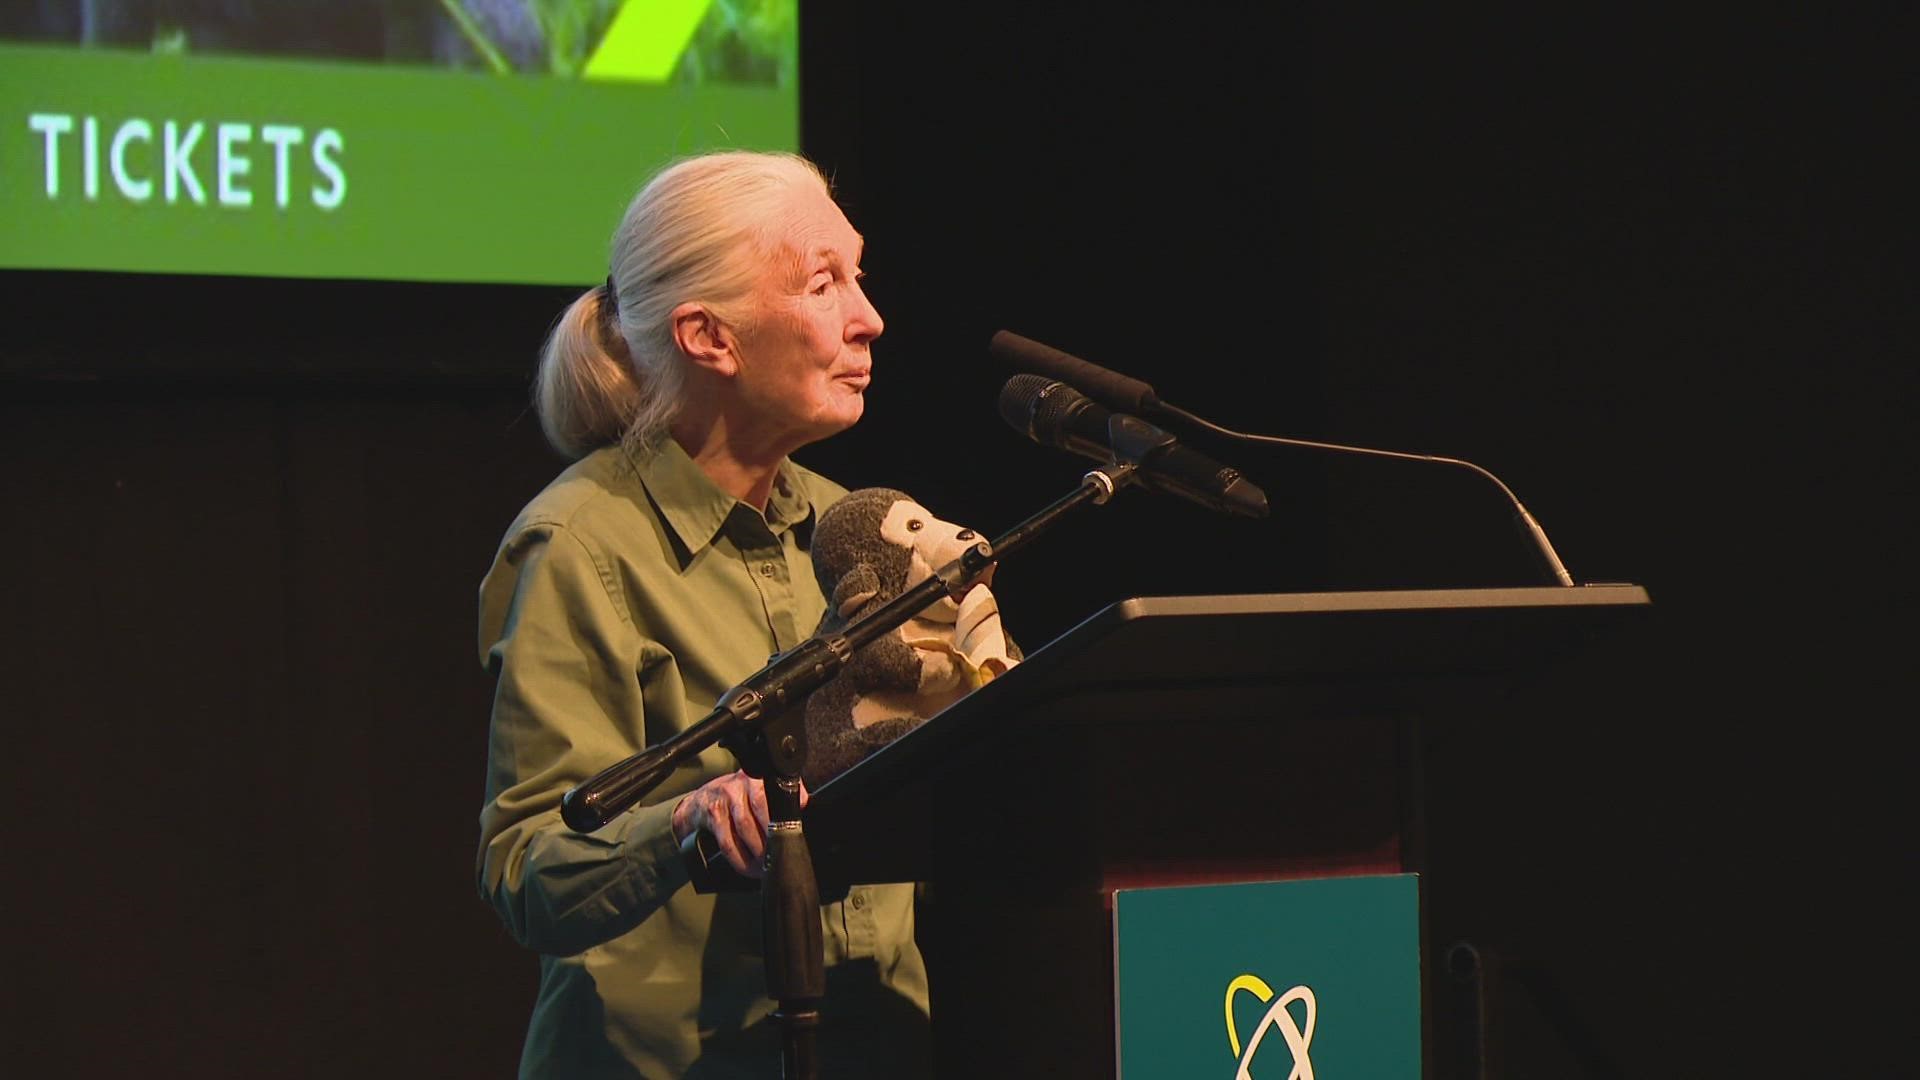 The traveling experience is called "Becoming Jane: The Evolution of Dr. Jane Goodall". It's open now.